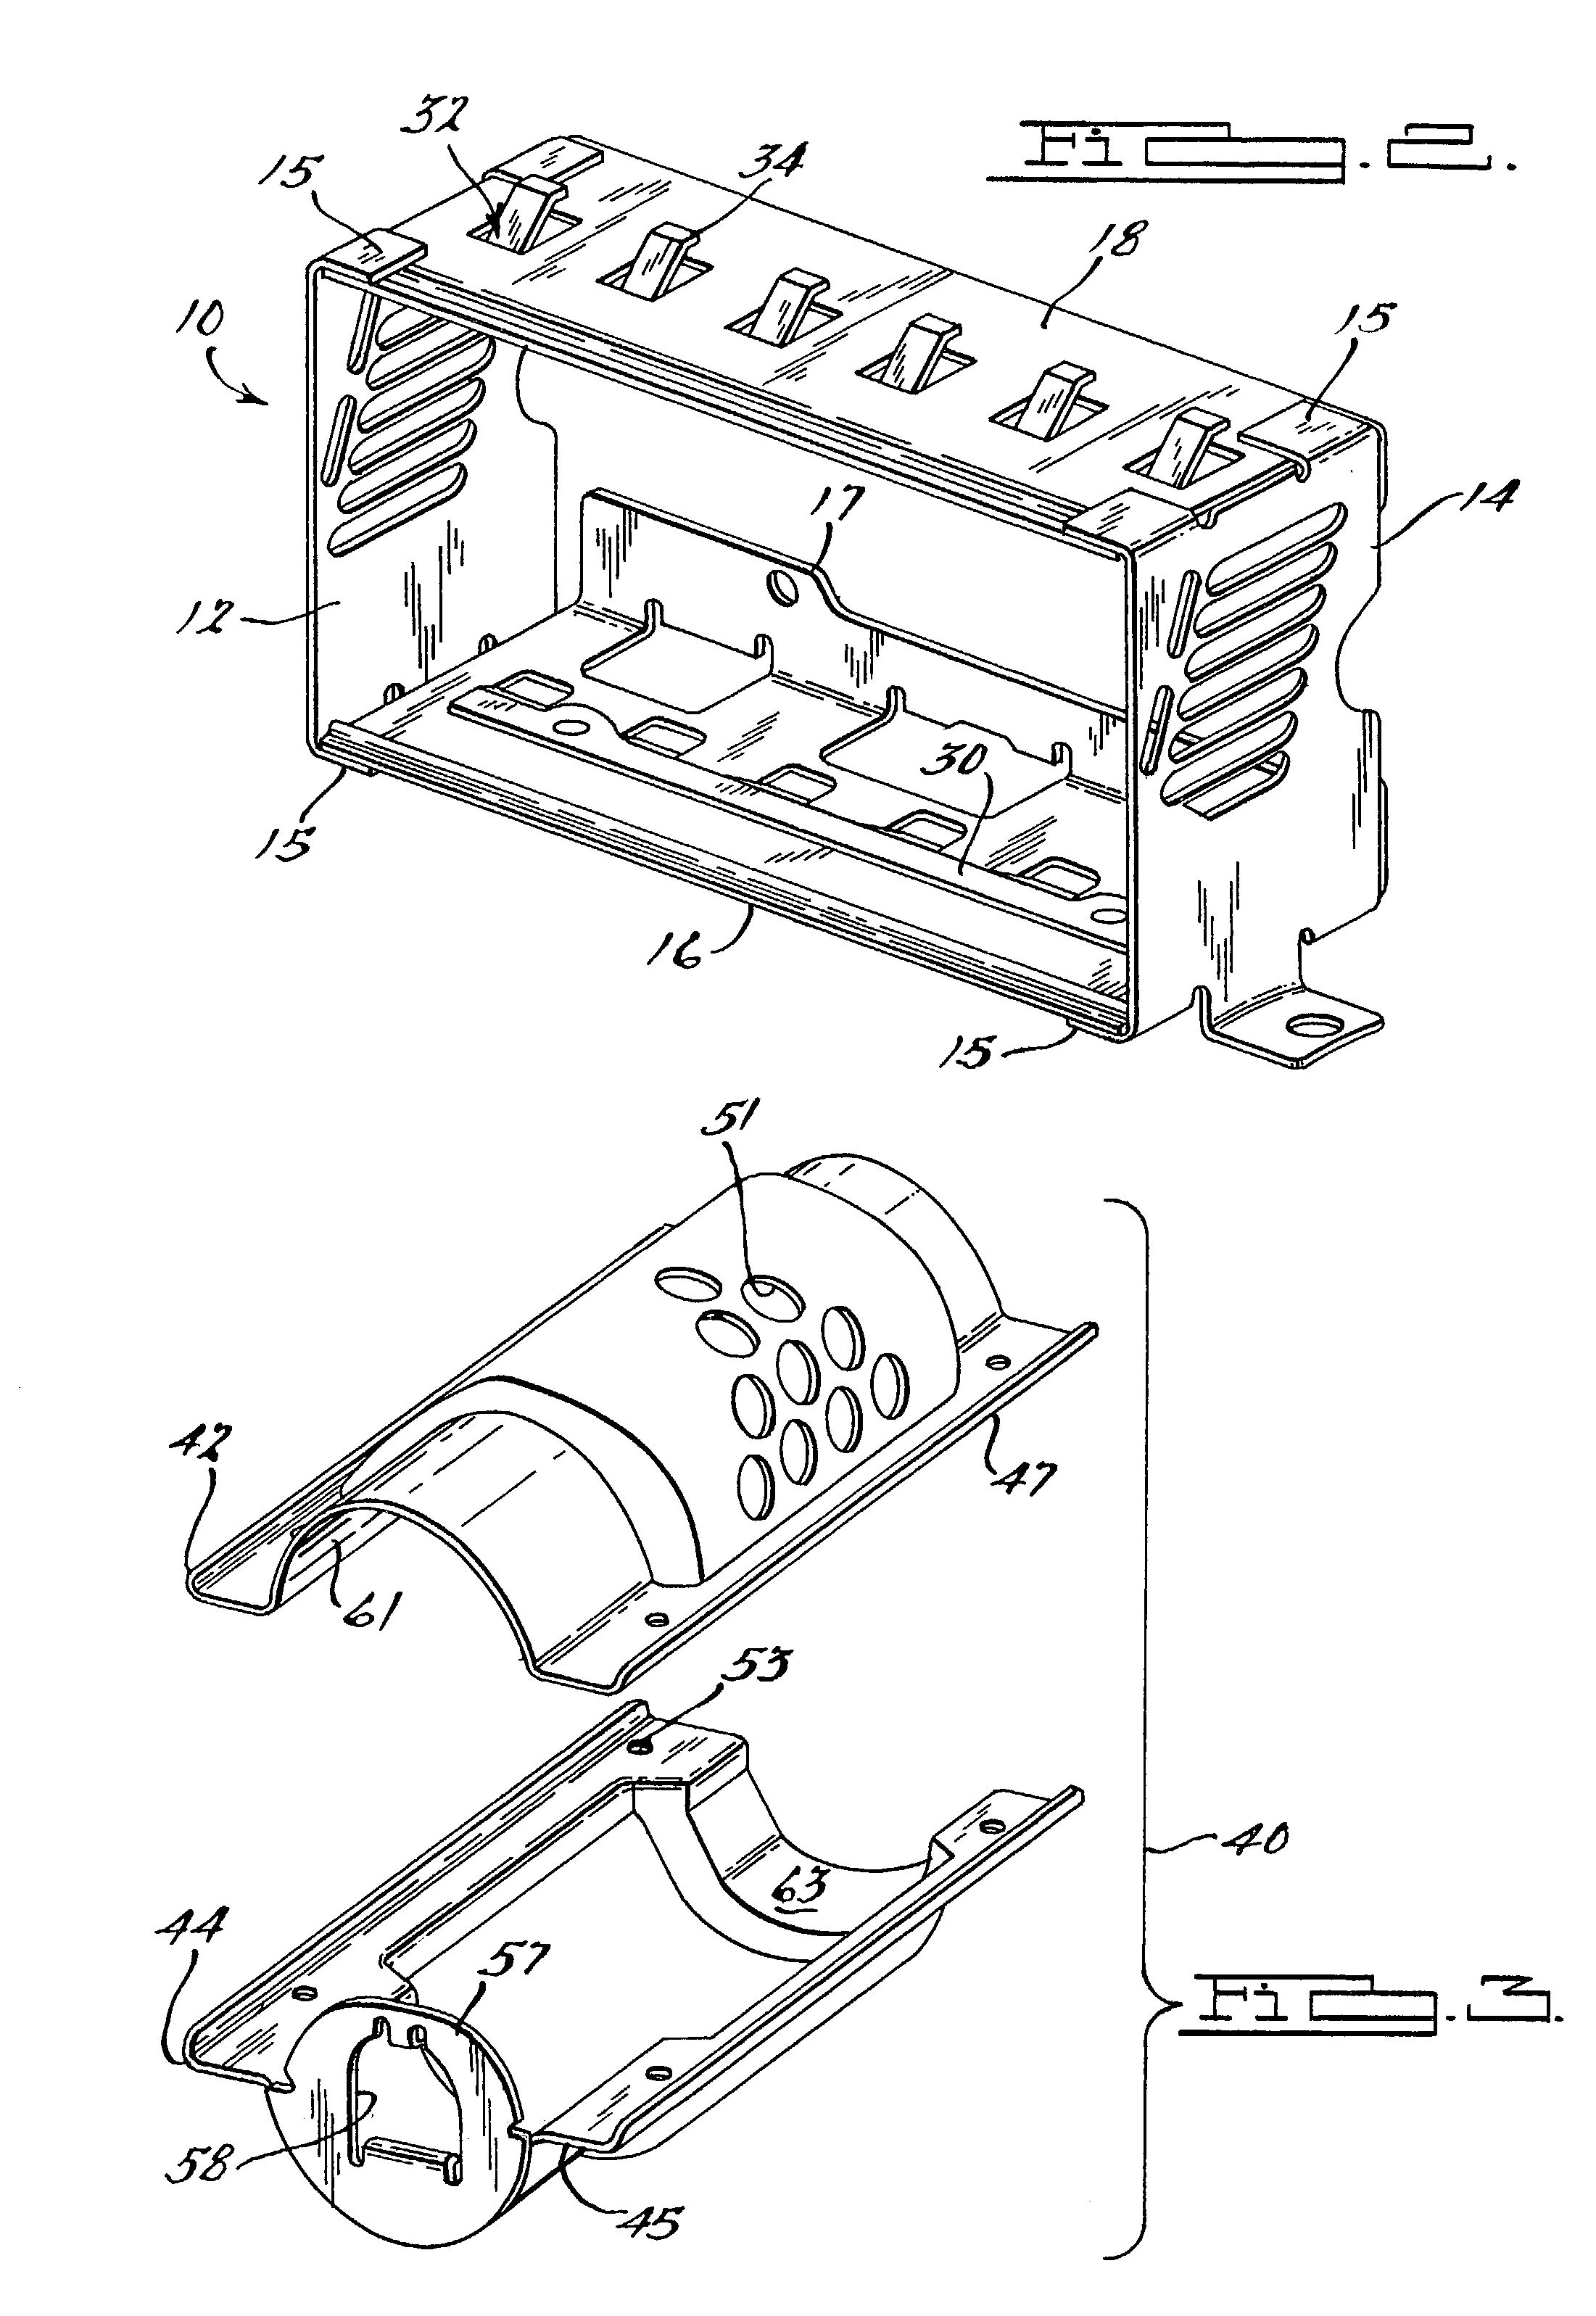 Modular airbag housing and method of manufacture